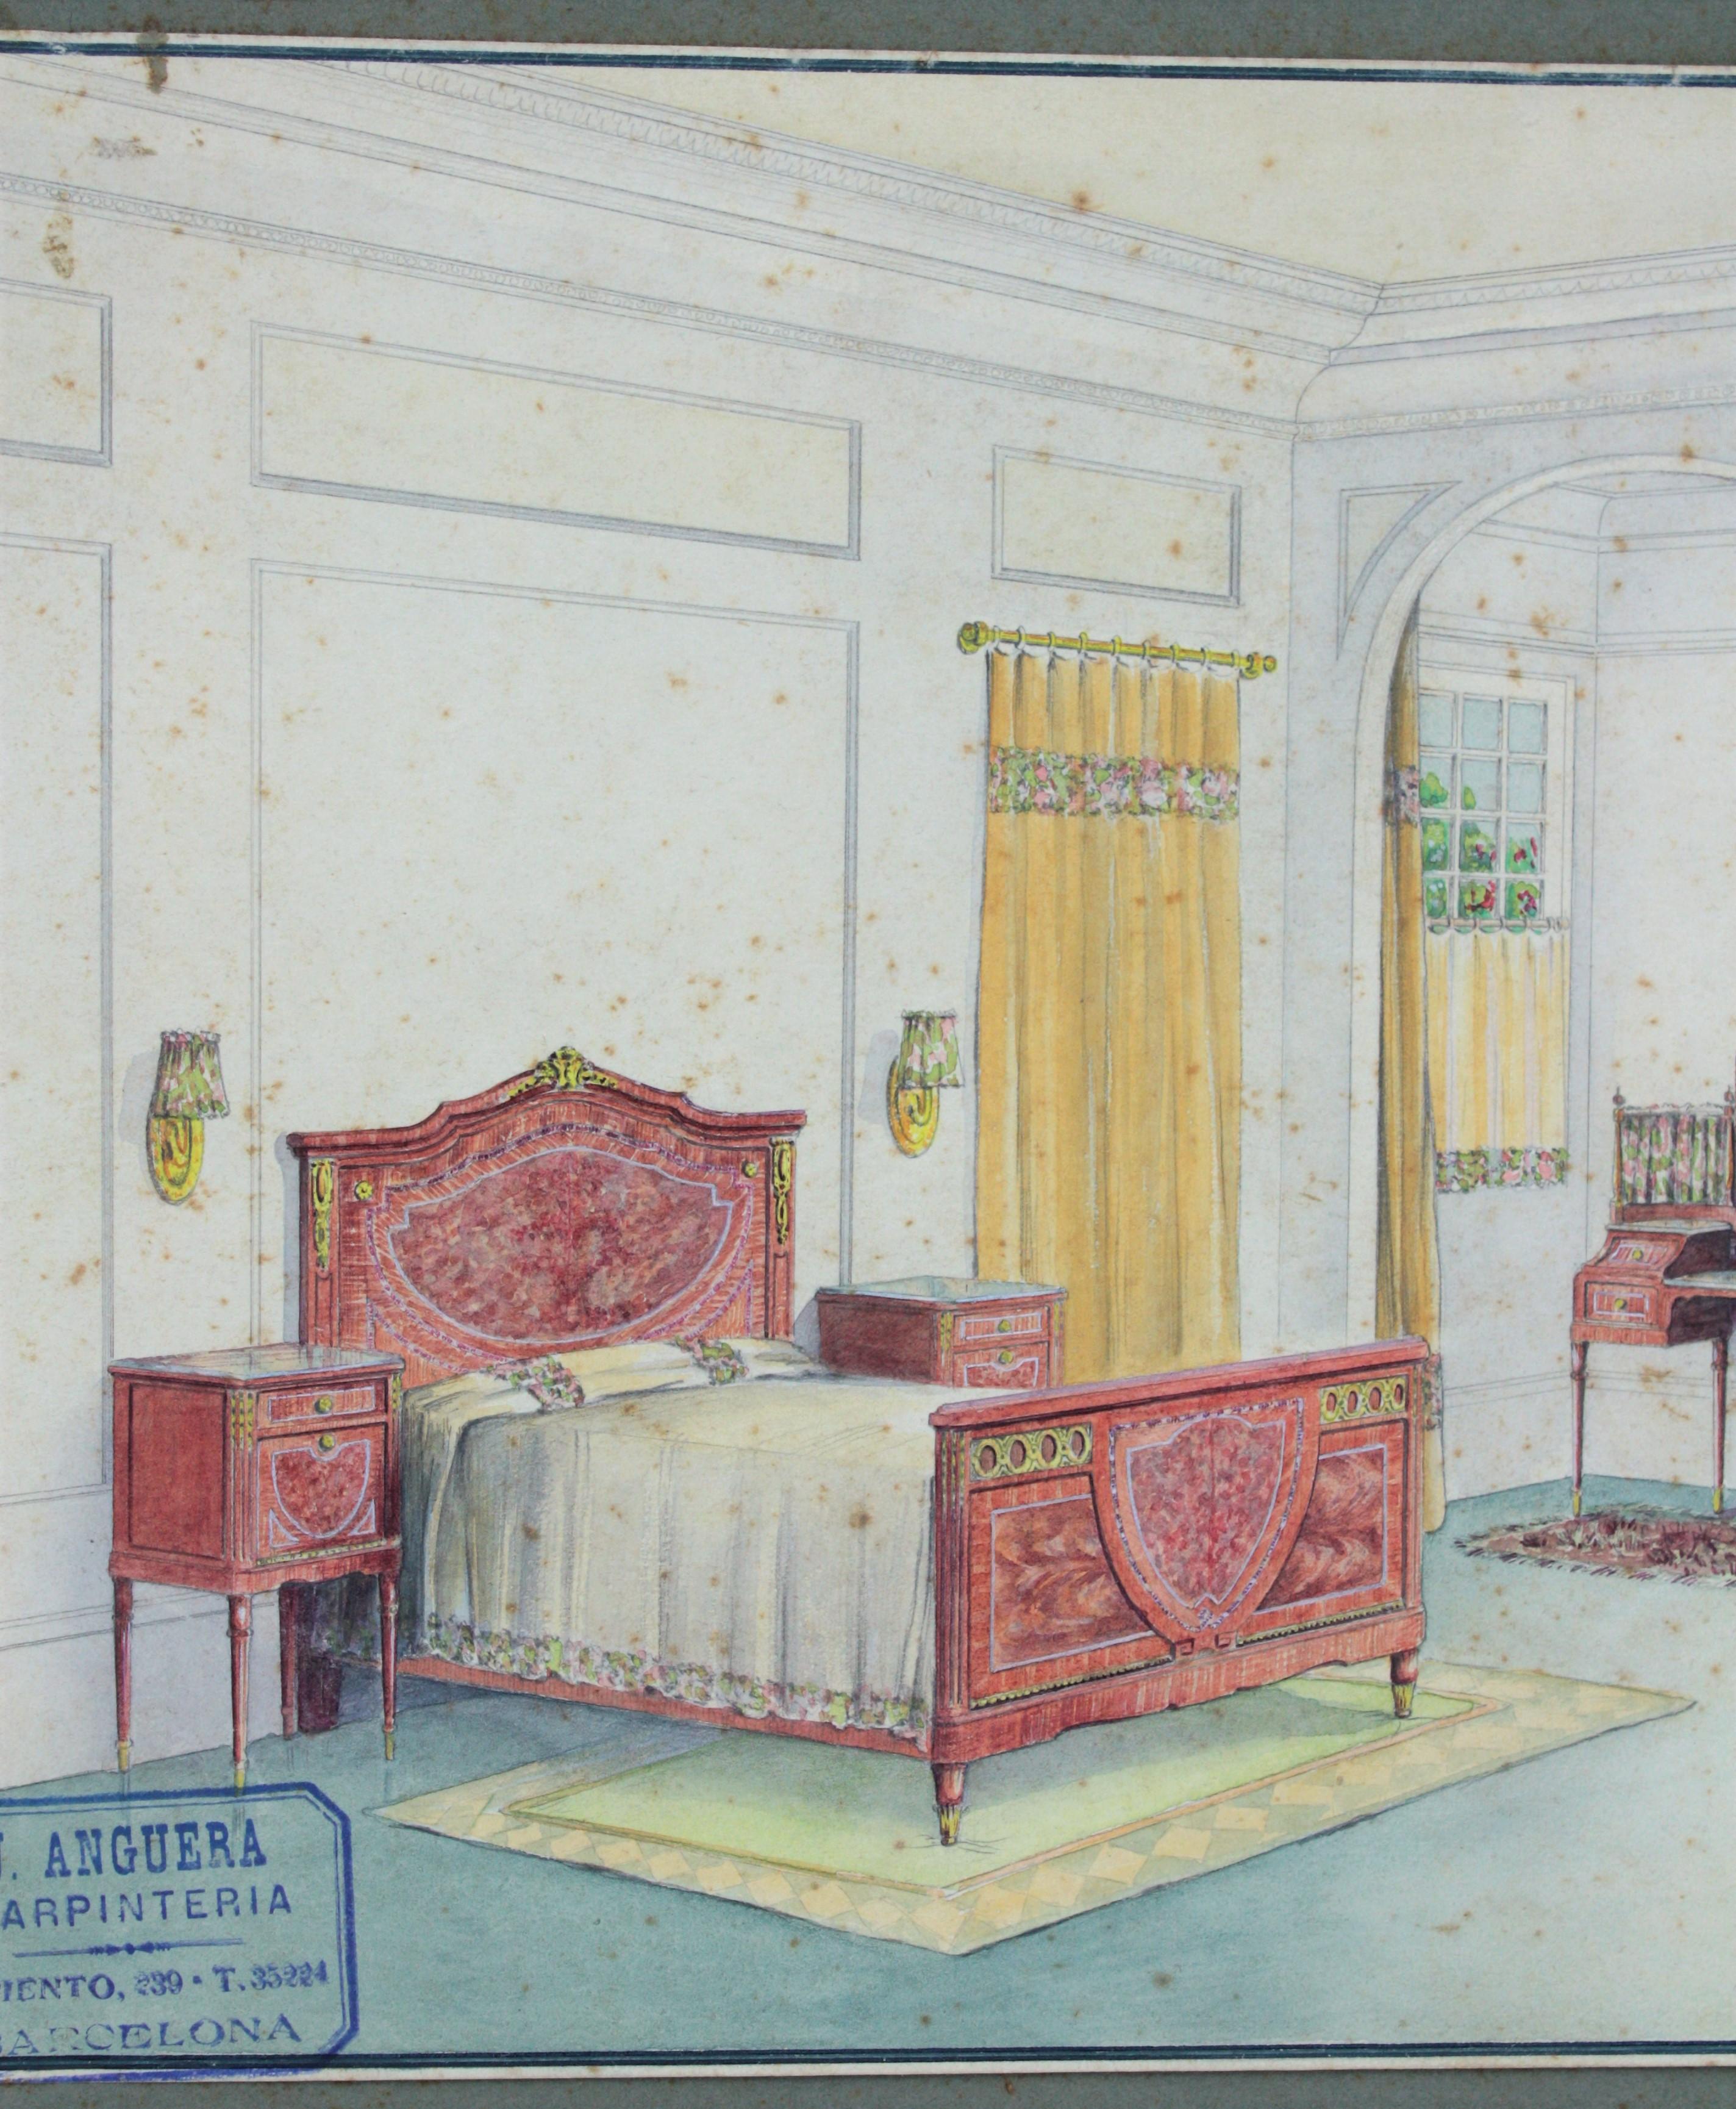 Spanish neoclassical style bedroom indoor home scene. Original watercolor, ink and gouache drawing on vellum paper, project for a home decoration. Cabinet maker archives stamp bottom Lef: 'J. Anguera. Carpintería. Barcelona' Number 16.
Individual